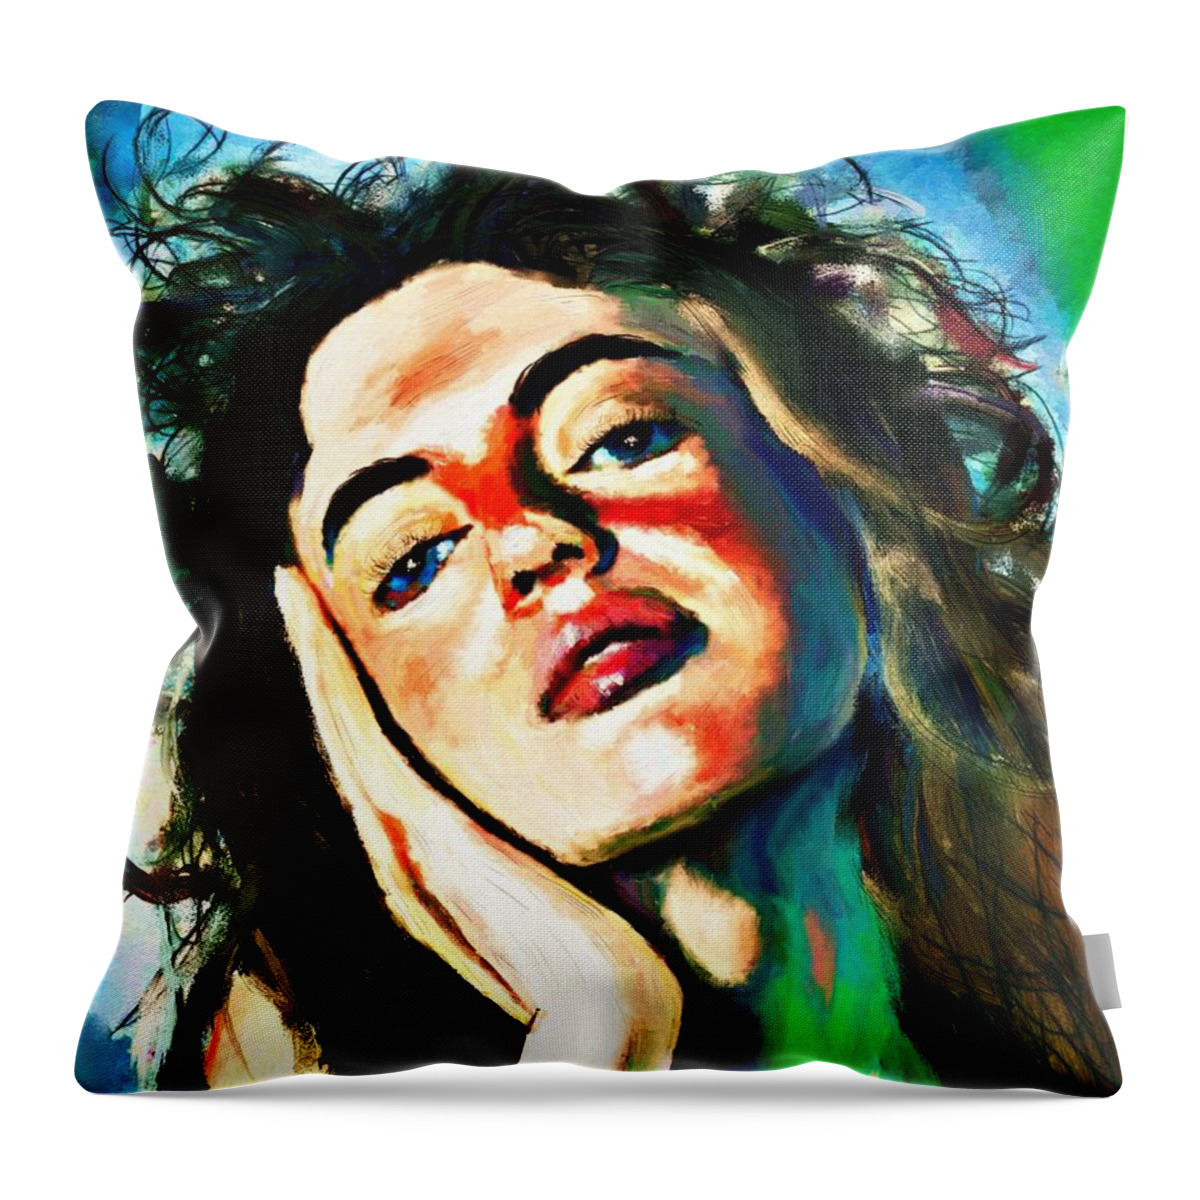 Portrait Throw Pillow featuring the painting Portrait Sensual Beauty Catalina by James Shepherd